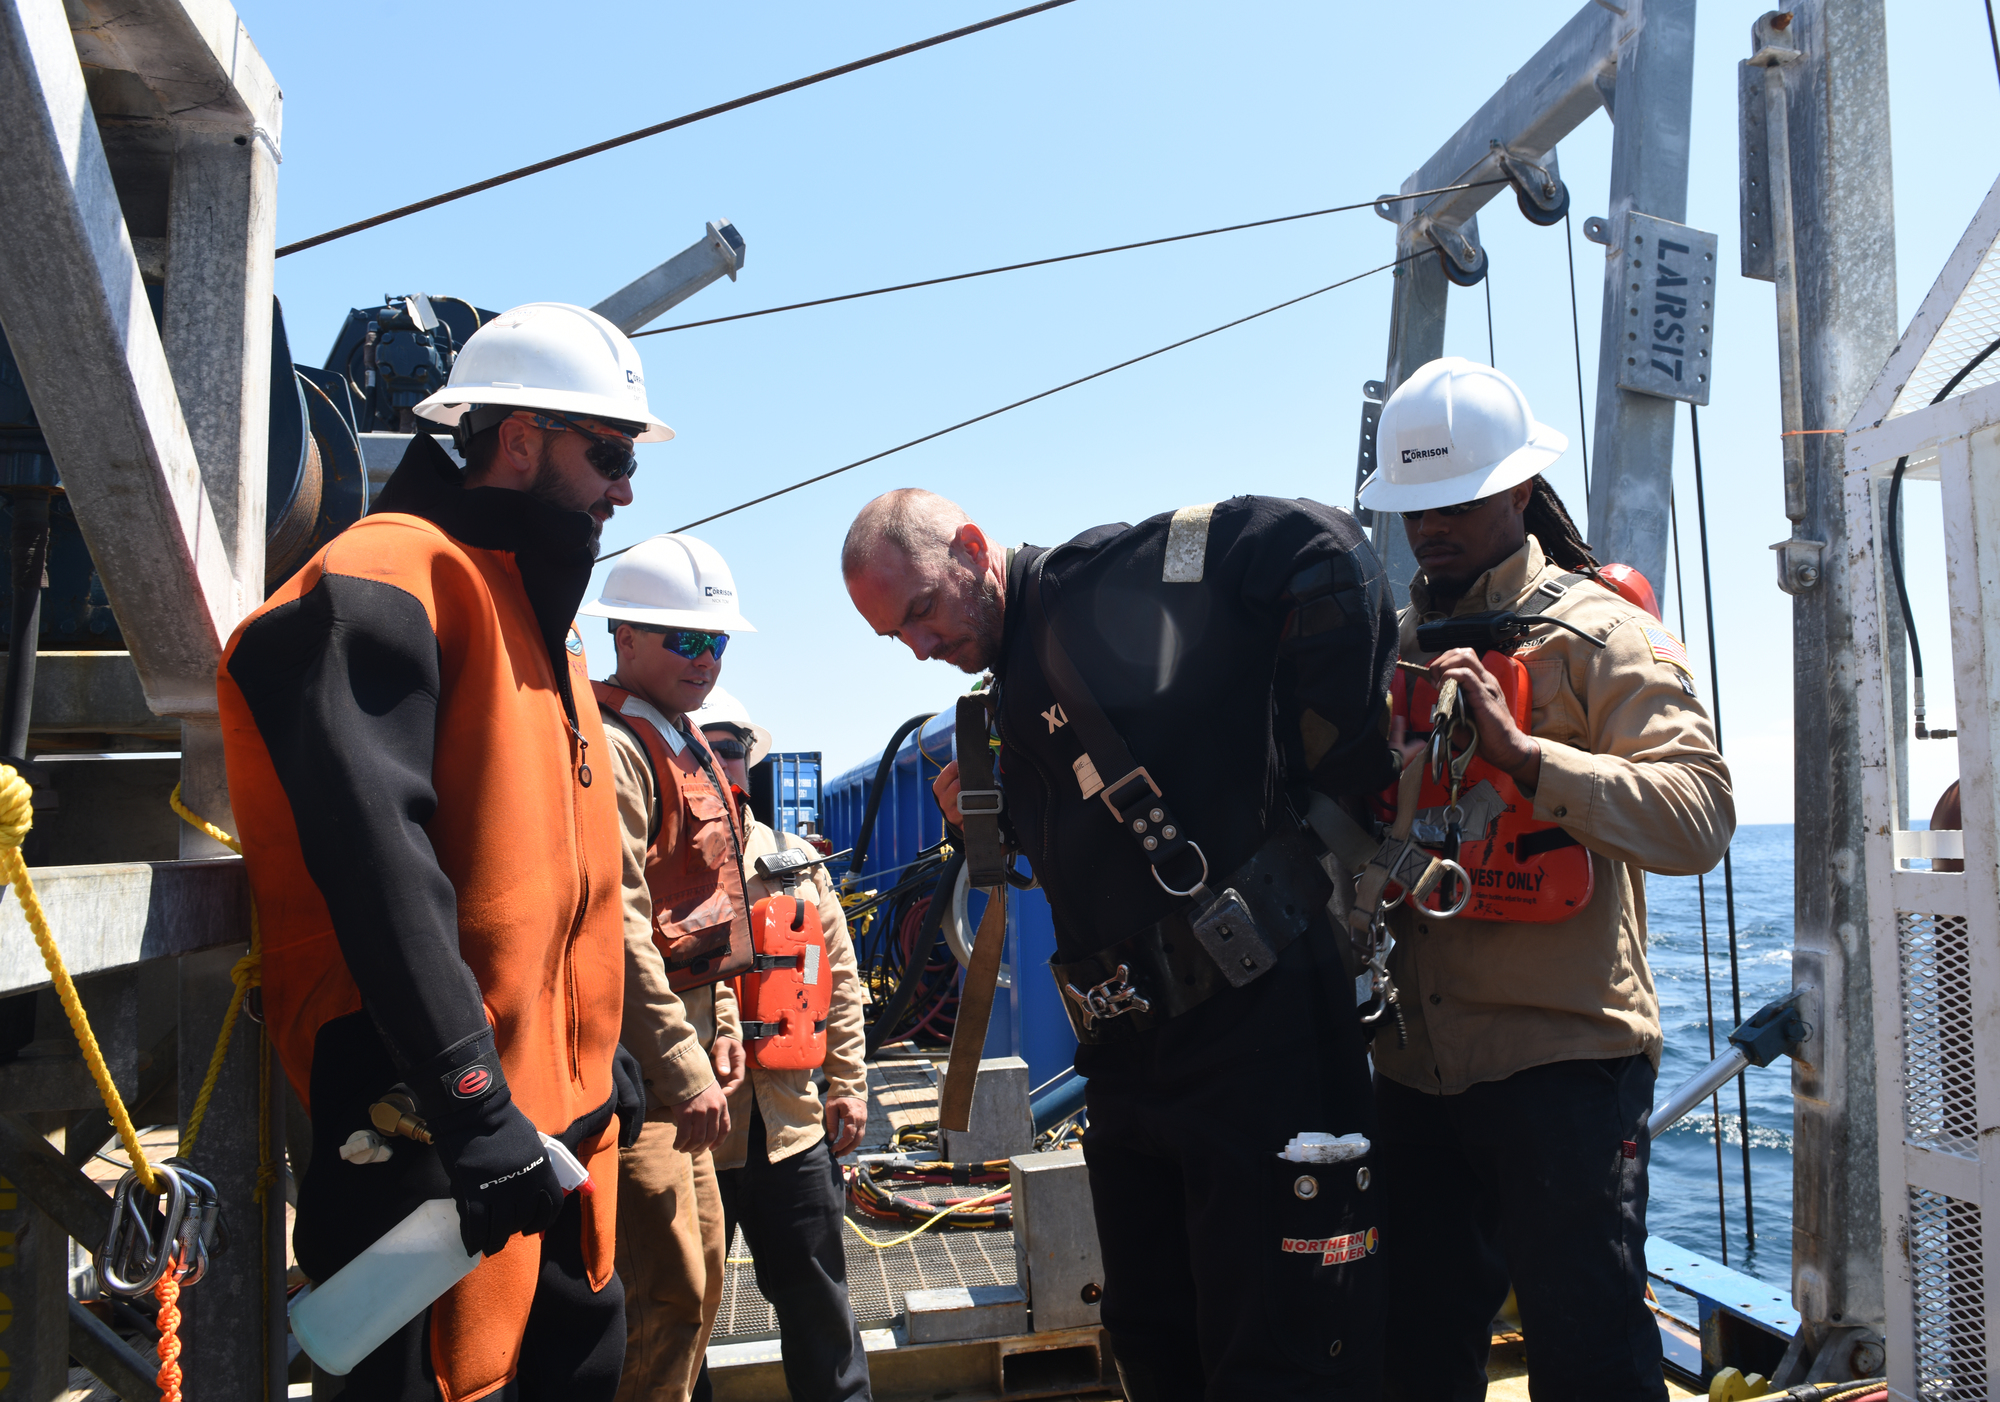 A team assists a diver as he prepares to enter the water and begin work 180 feet below the surface on the tanker Coimbra wreck, May 16, 2019. The U.S. Coast Guard has contracted Resolve Marine Group to conduct a full assessment of oil remaining on the Coimbra wreck, located approximately 30 miles southeast of Shinnecock, N.Y. If substantial oil still remains, and if feasible, the Coast Guard will work with Resolve Marine Group to remove oil from the wreck in order to reduce pollution risks to the environment. The Coimbra, a British-flagged supply ship, sunk off the coast of Long Island in January 1942 when a German U-boat torpedoed it. (U.S. Coast Guard photo by Chief Warrant Officer Allyson E.T. Conroy)